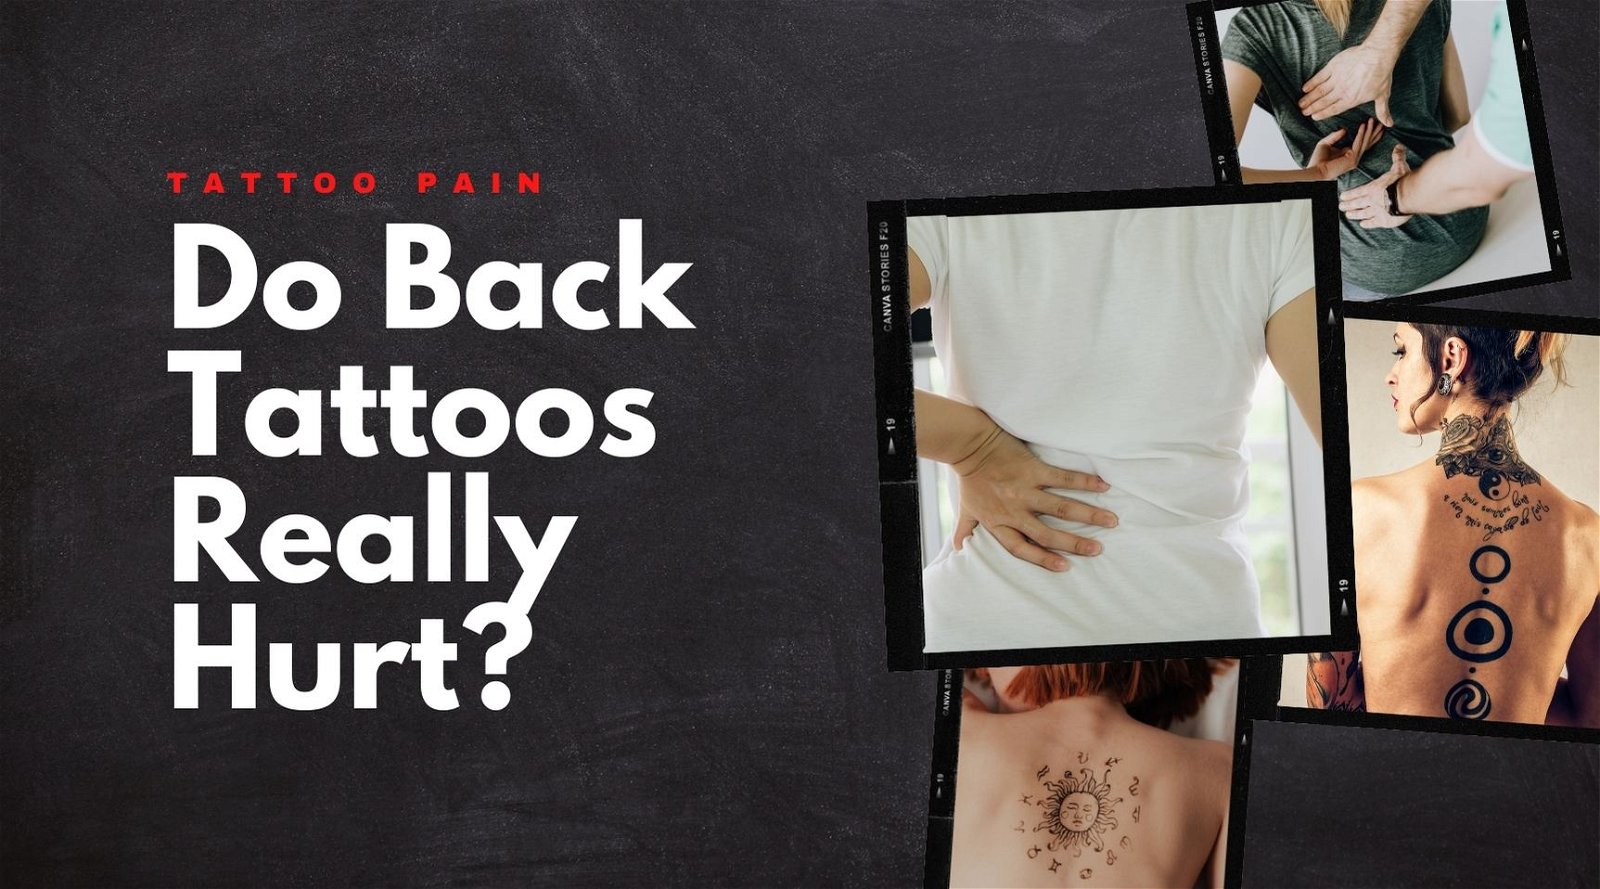 4400 Lower Back Stock Photos Pictures  RoyaltyFree Images  iStock   Lower back pain Lower back tattoo Lower back man